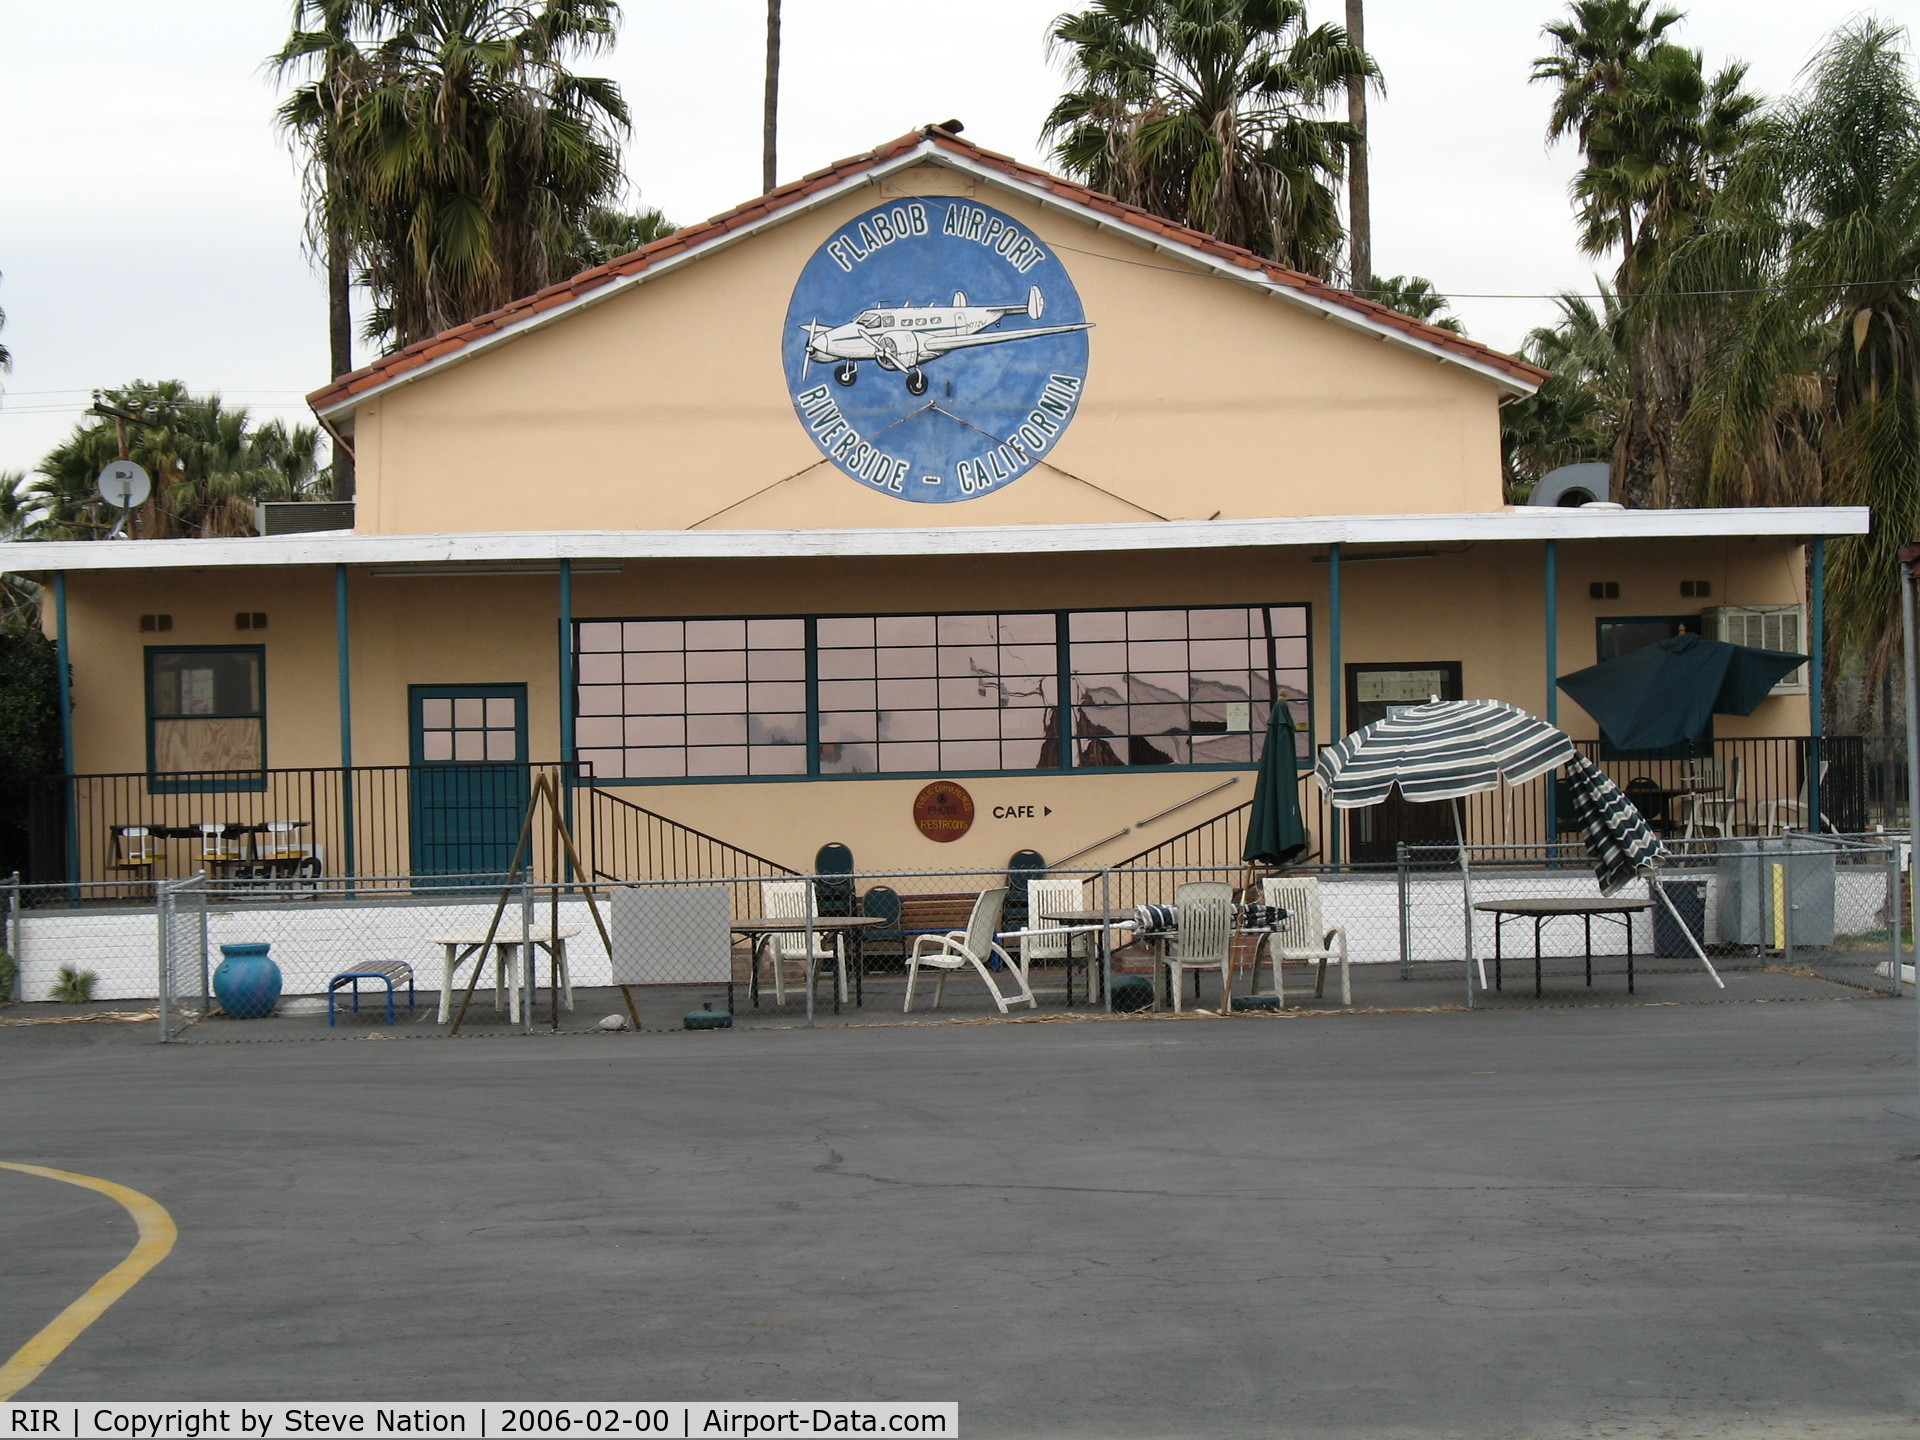 Flabob Airport (RIR) - Airport Cafe and Beech 18 mural at Flabob (Riverside County) Airport, CA